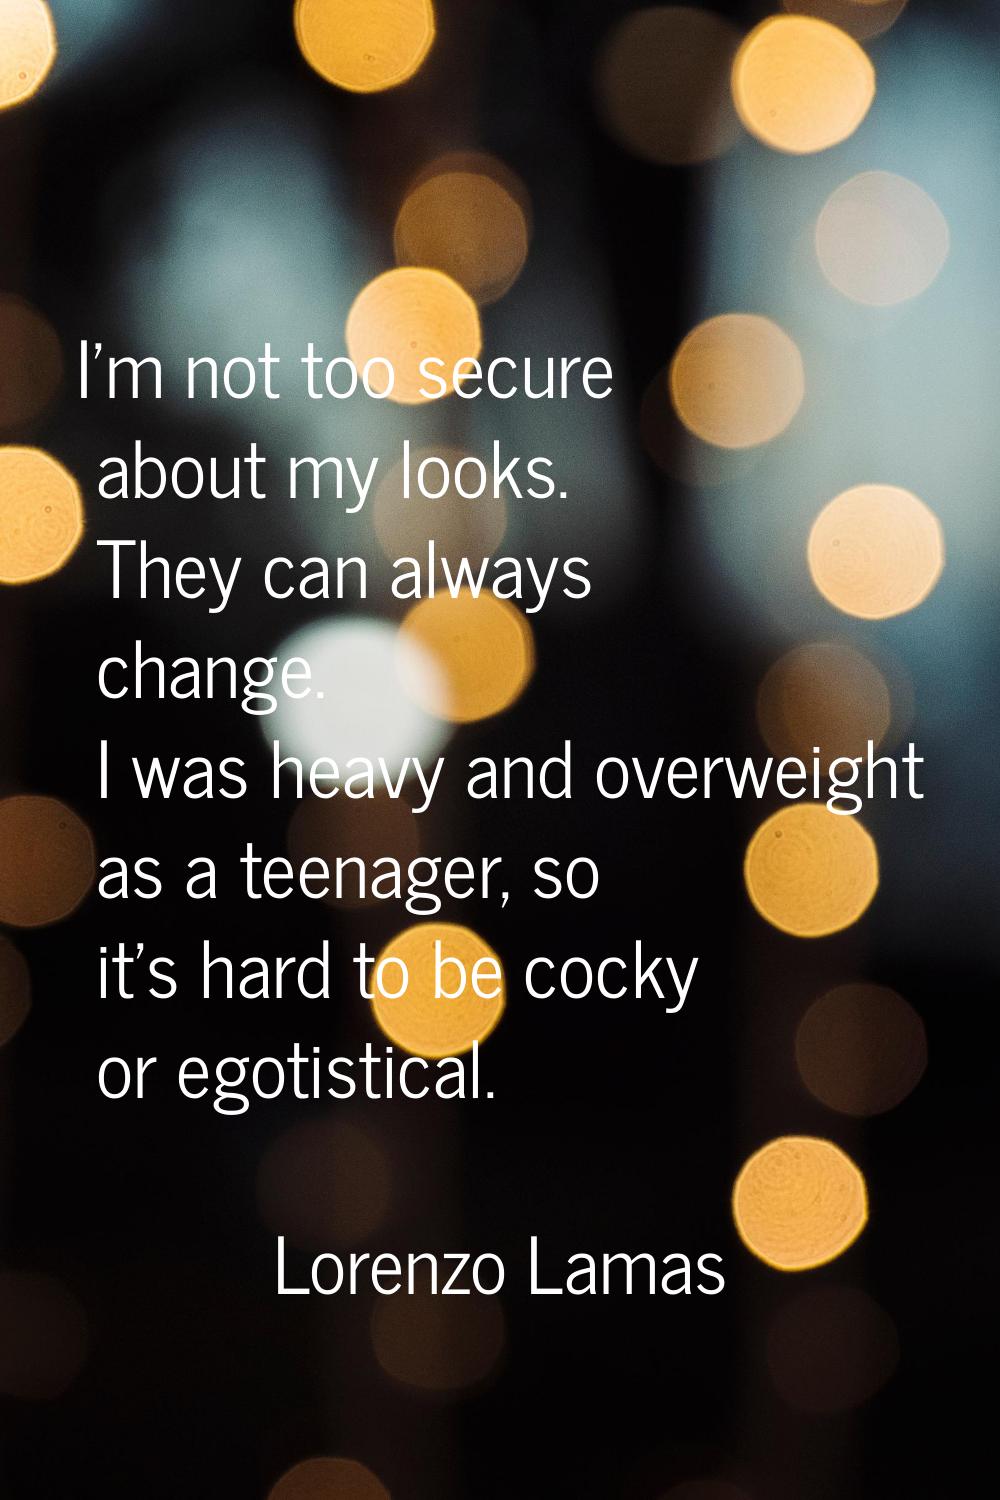 I'm not too secure about my looks. They can always change. I was heavy and overweight as a teenager